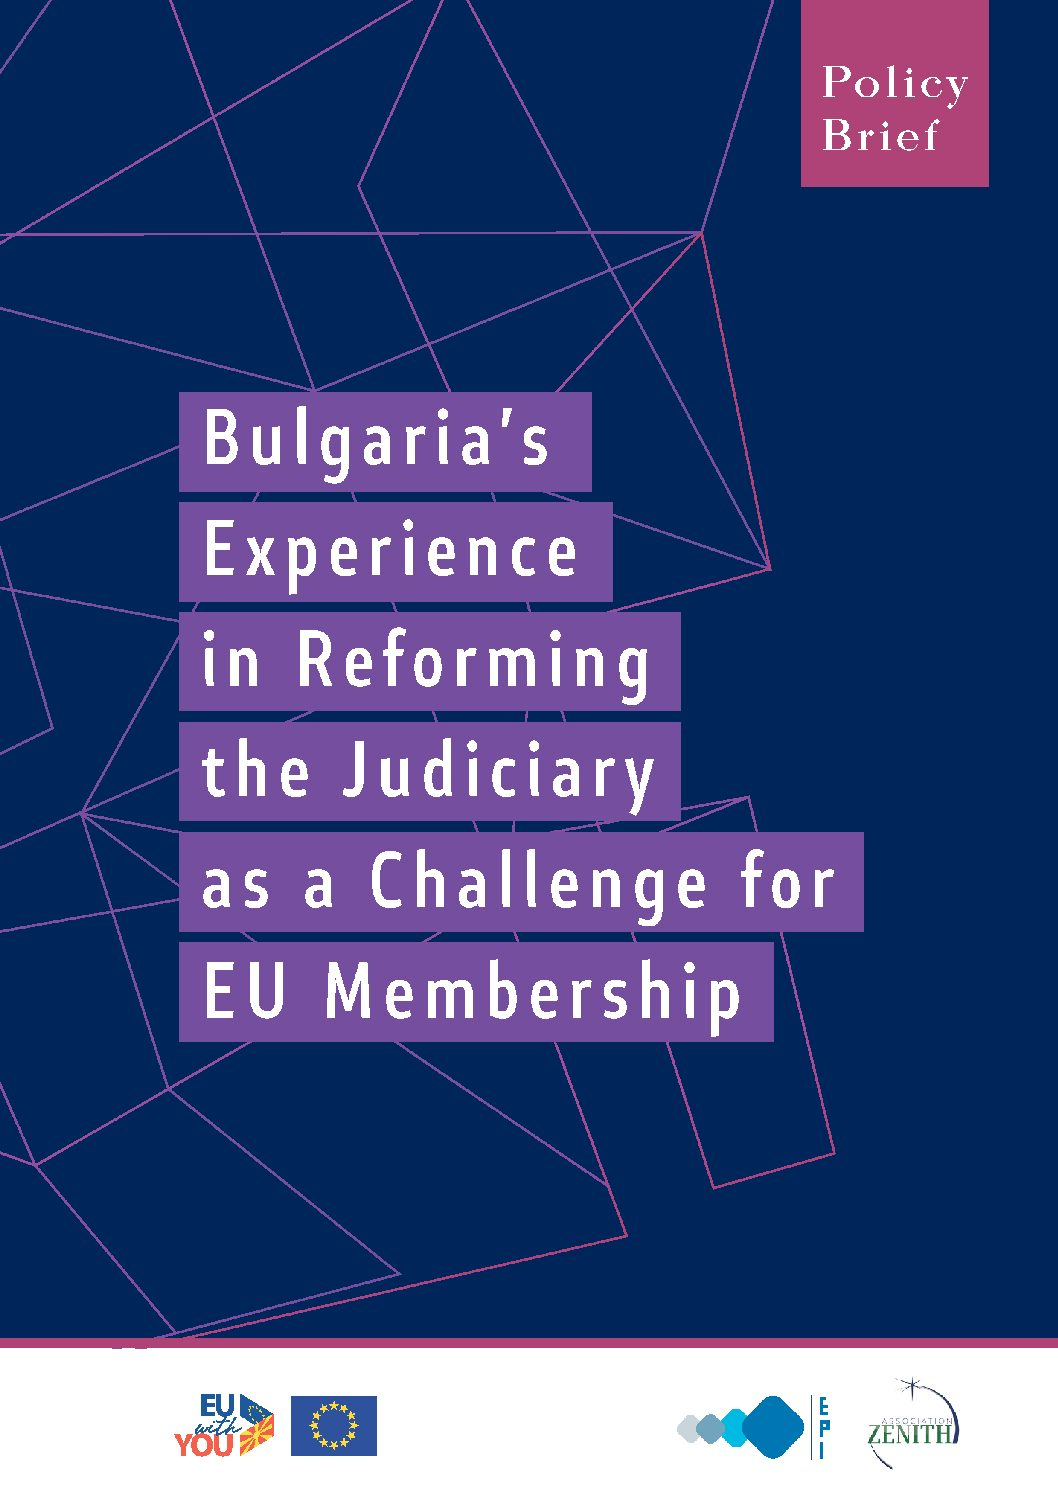 Bulgaria’s Experience in Reforming the Judiciary as a Challenge for EU Membership